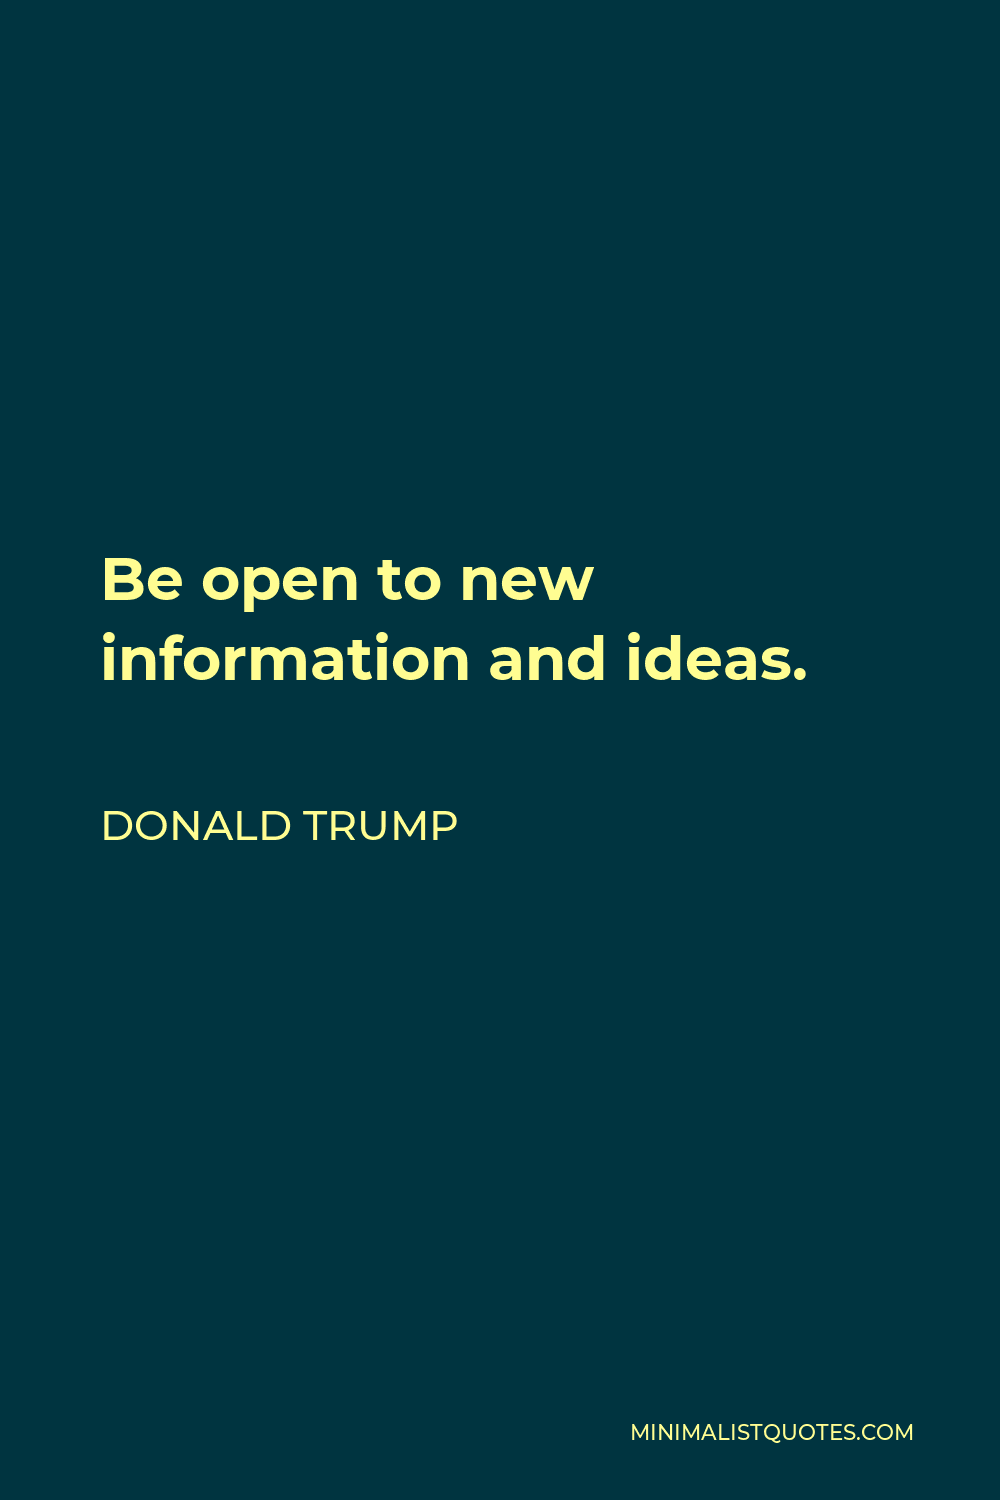 Donald Trump Quote - Be open to new information and ideas.